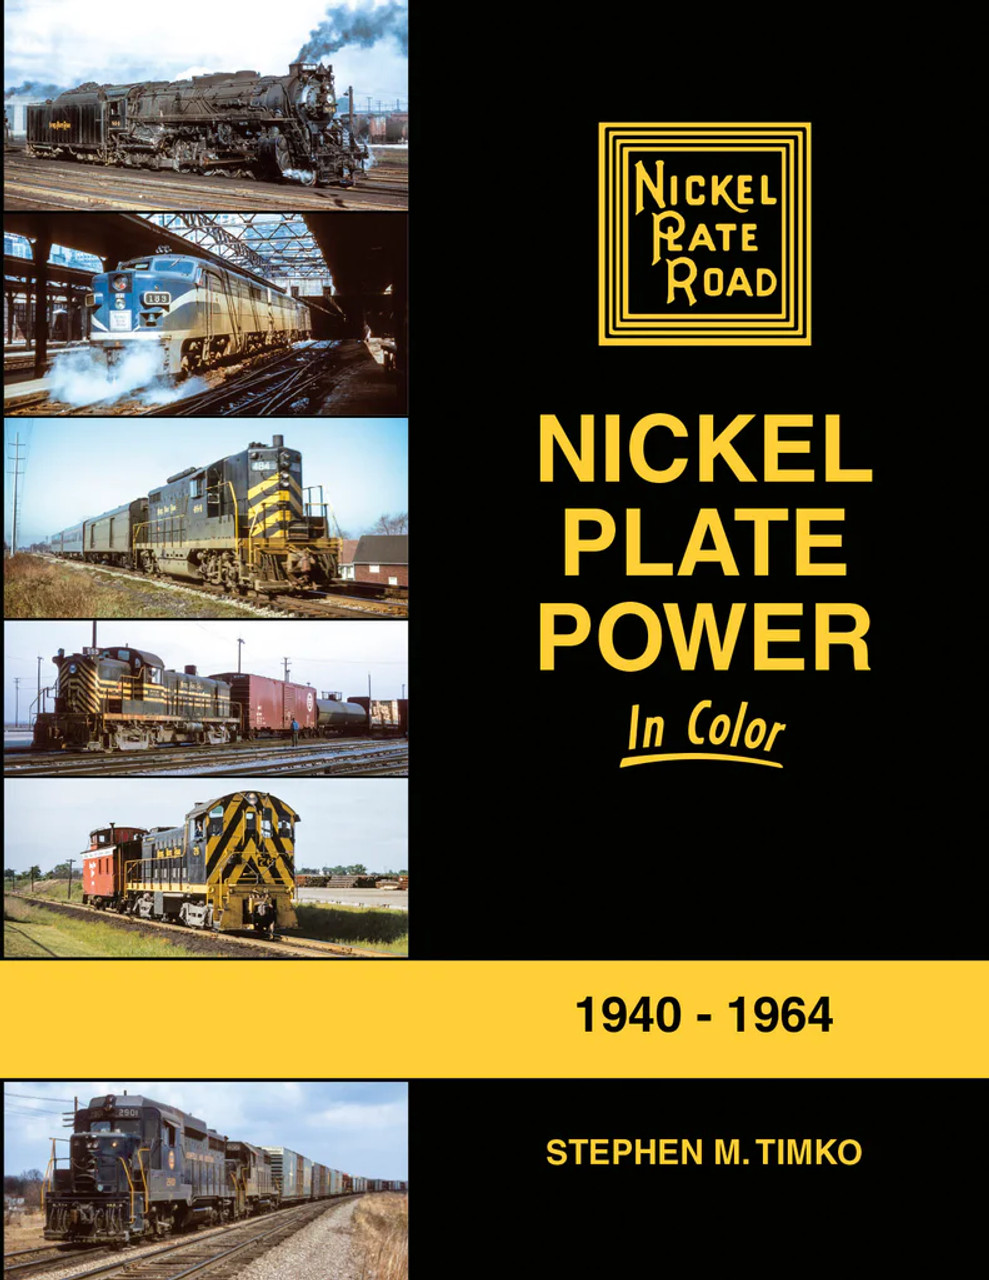 Morning Sun 1747 Nickel Plate Power In Color 1940-1964